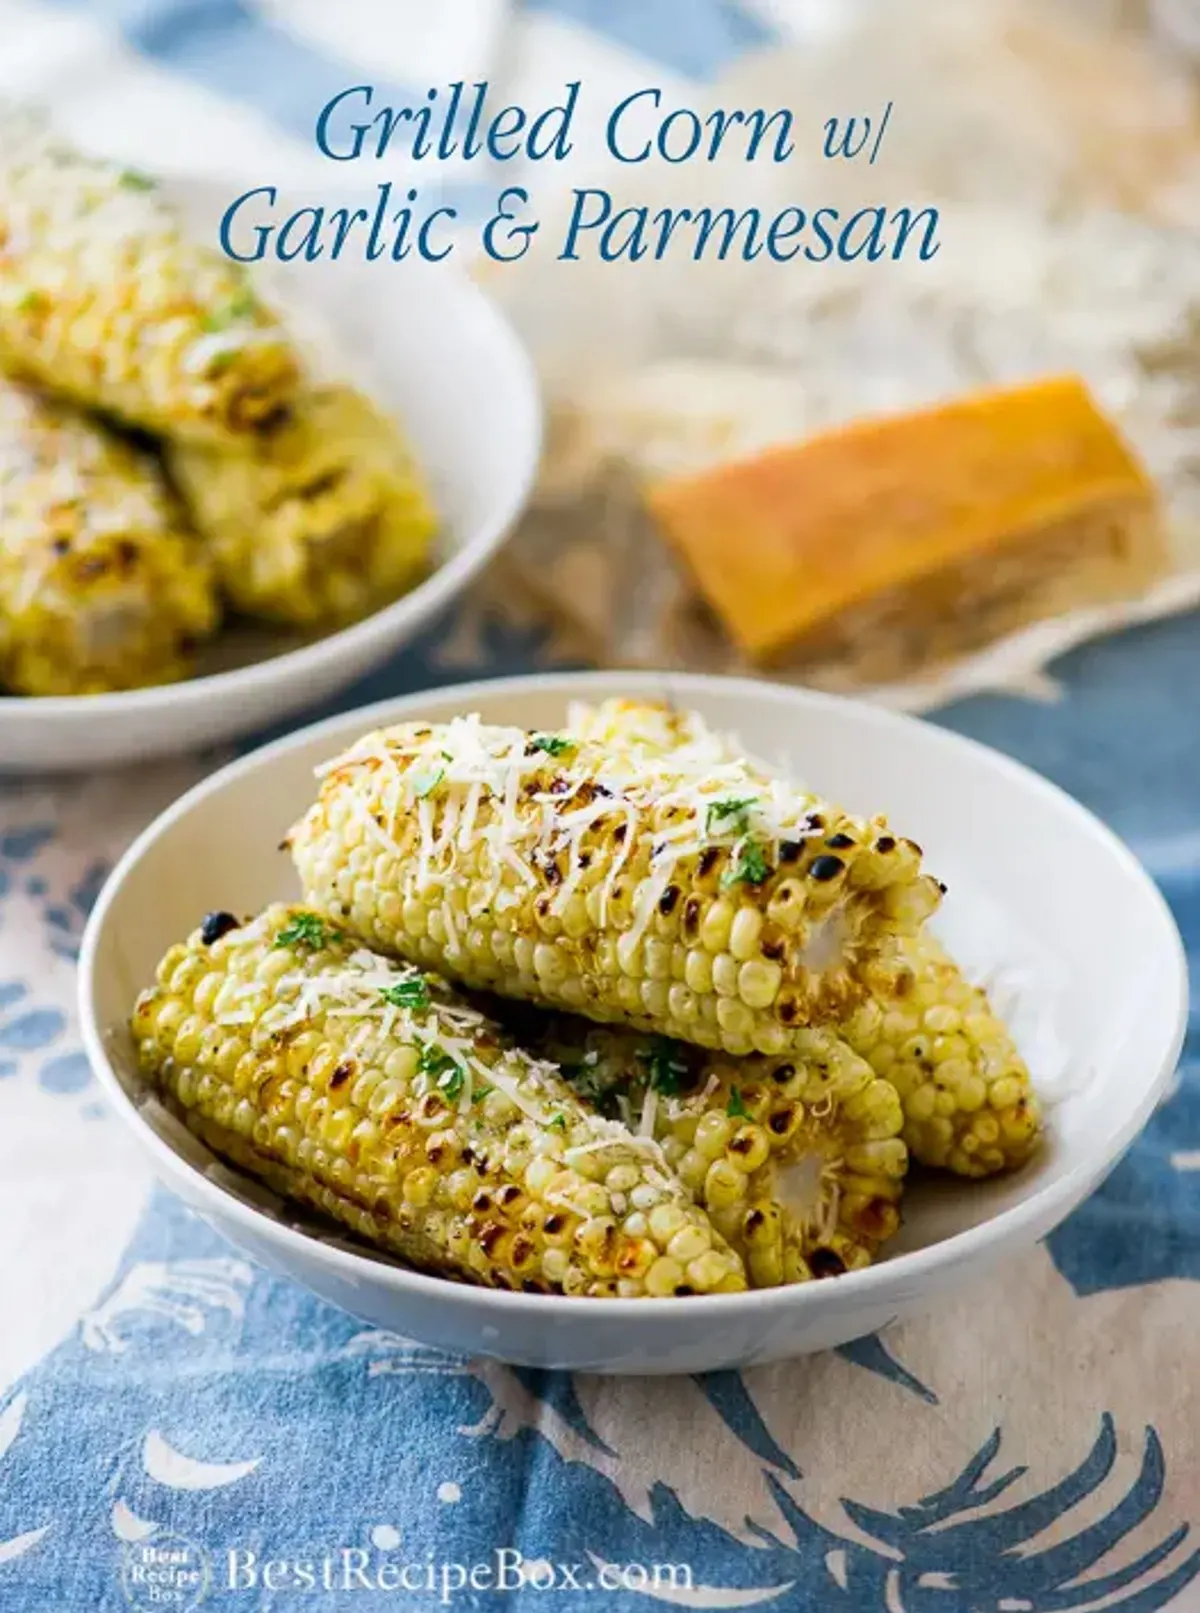 Grilled Corn Recipe with Garlic and Parmesan Cheese